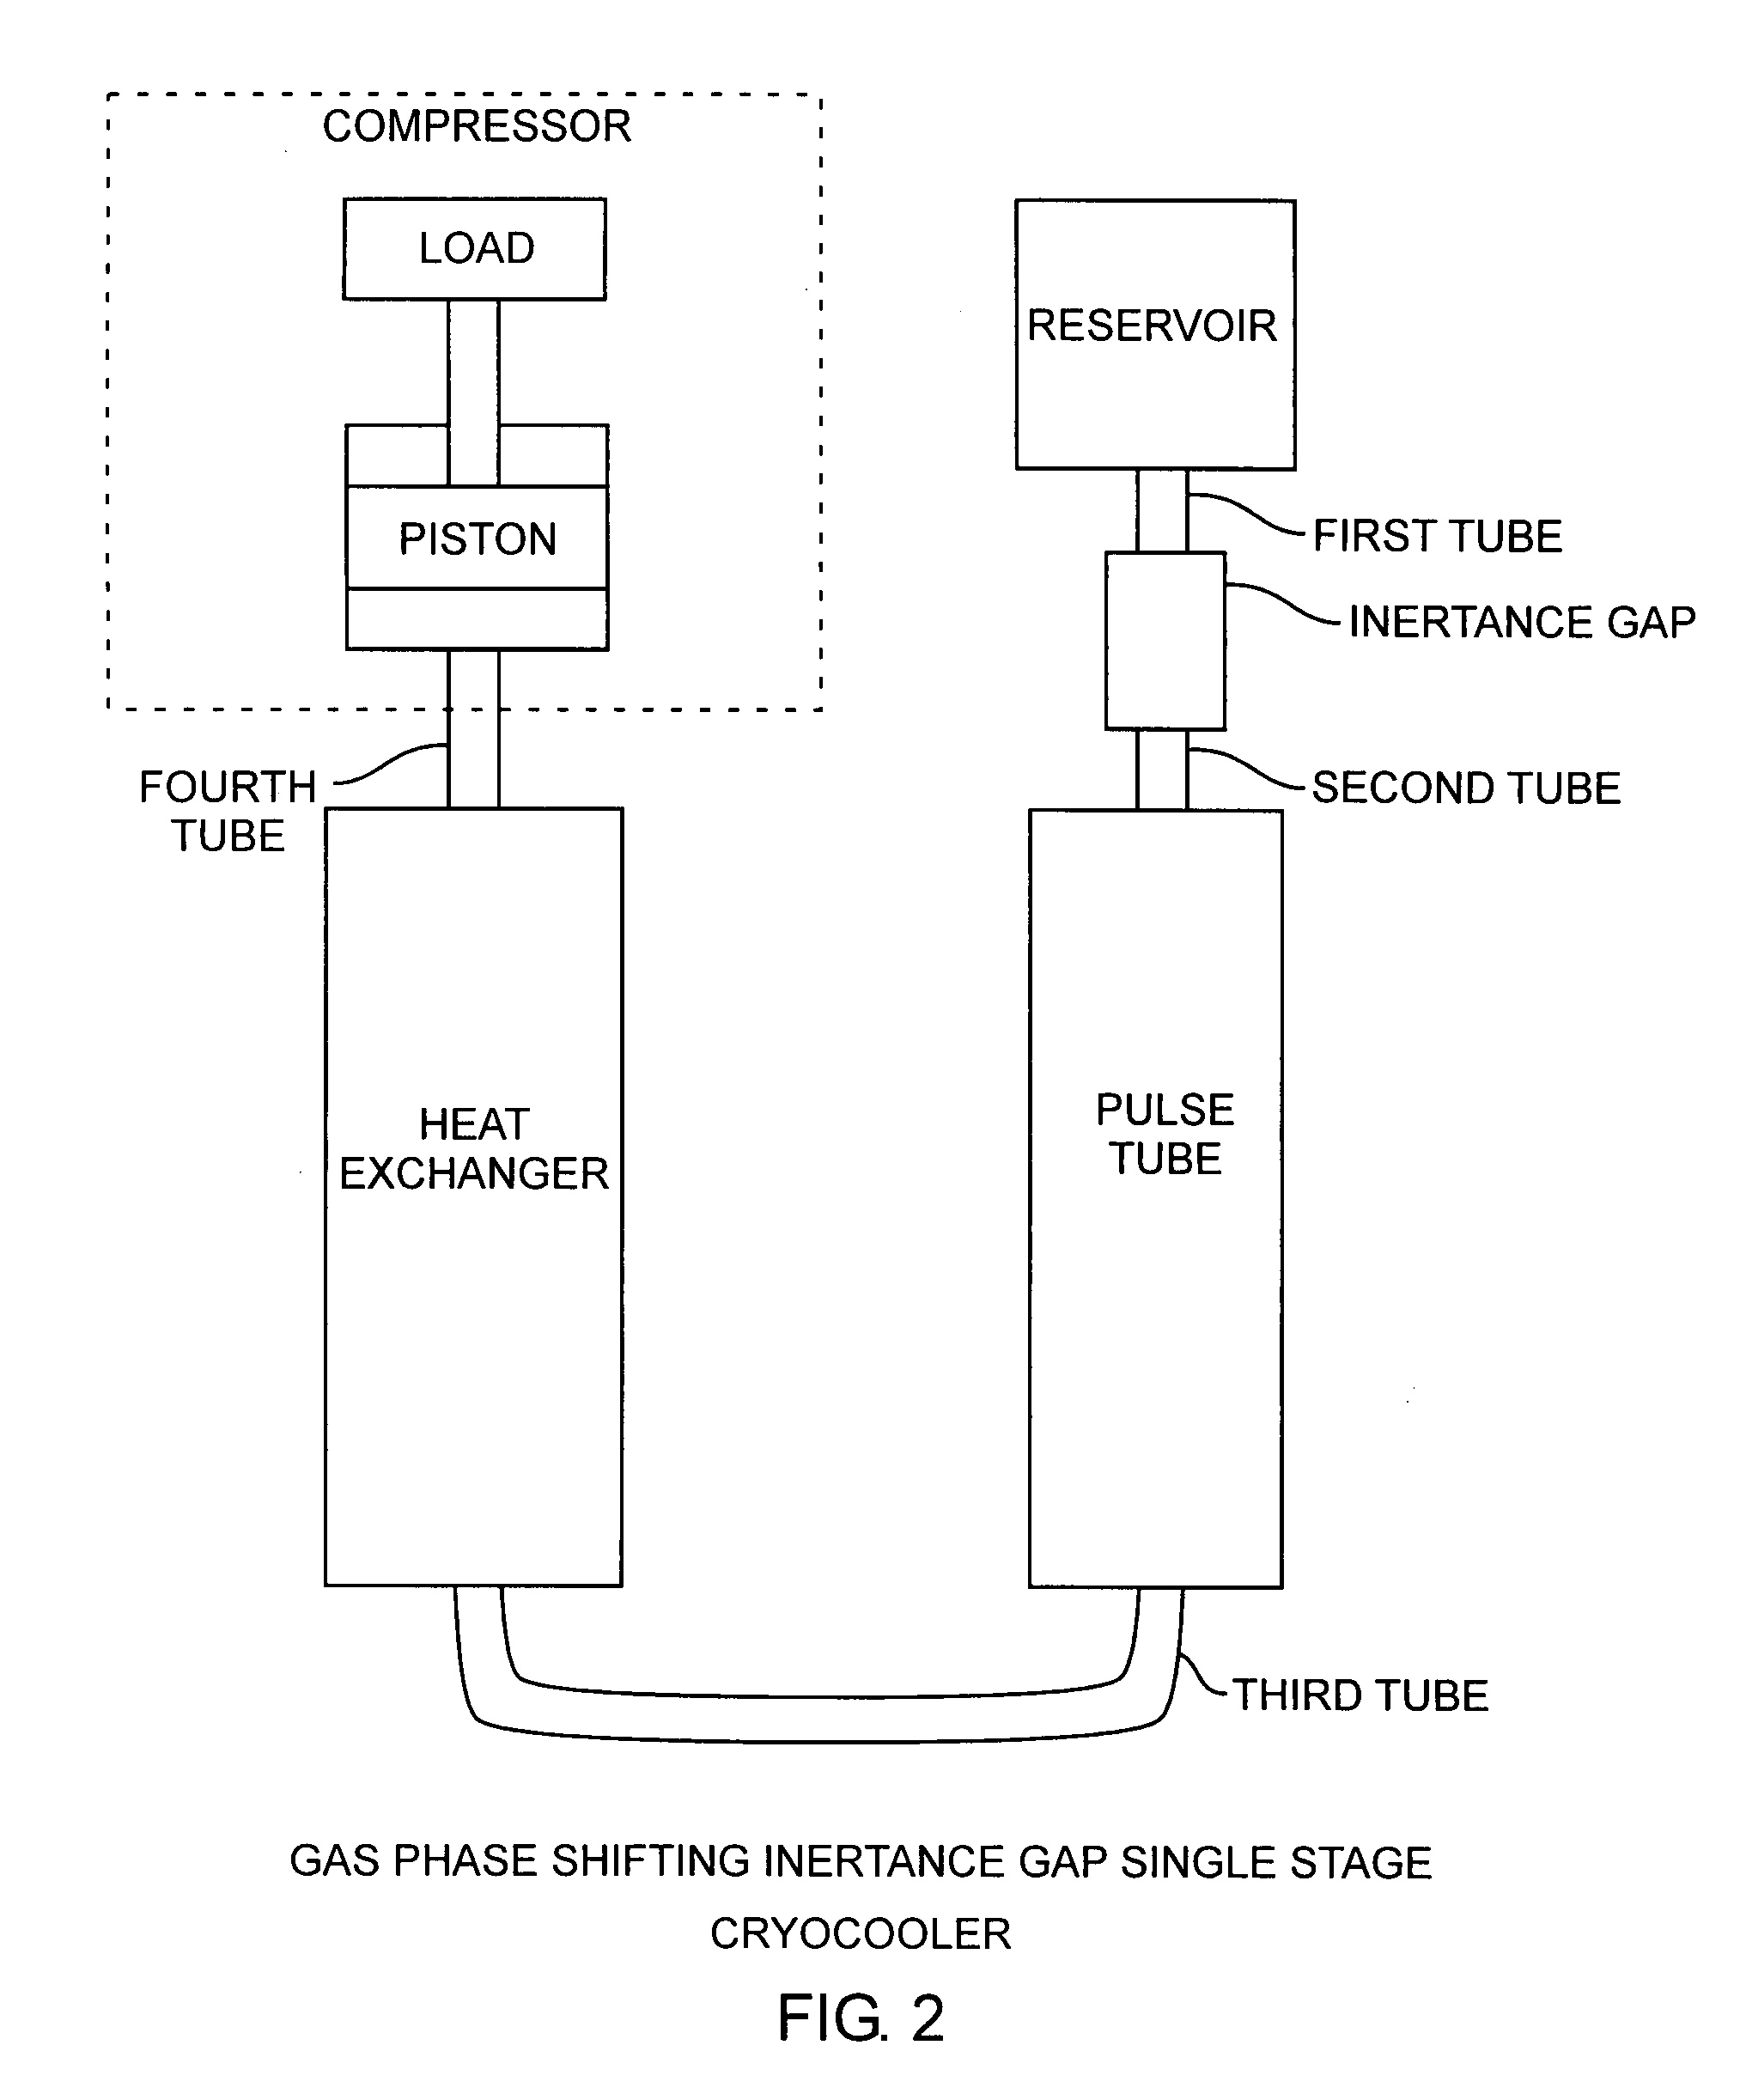 Controlled and variable gas phase shifting cryocooler